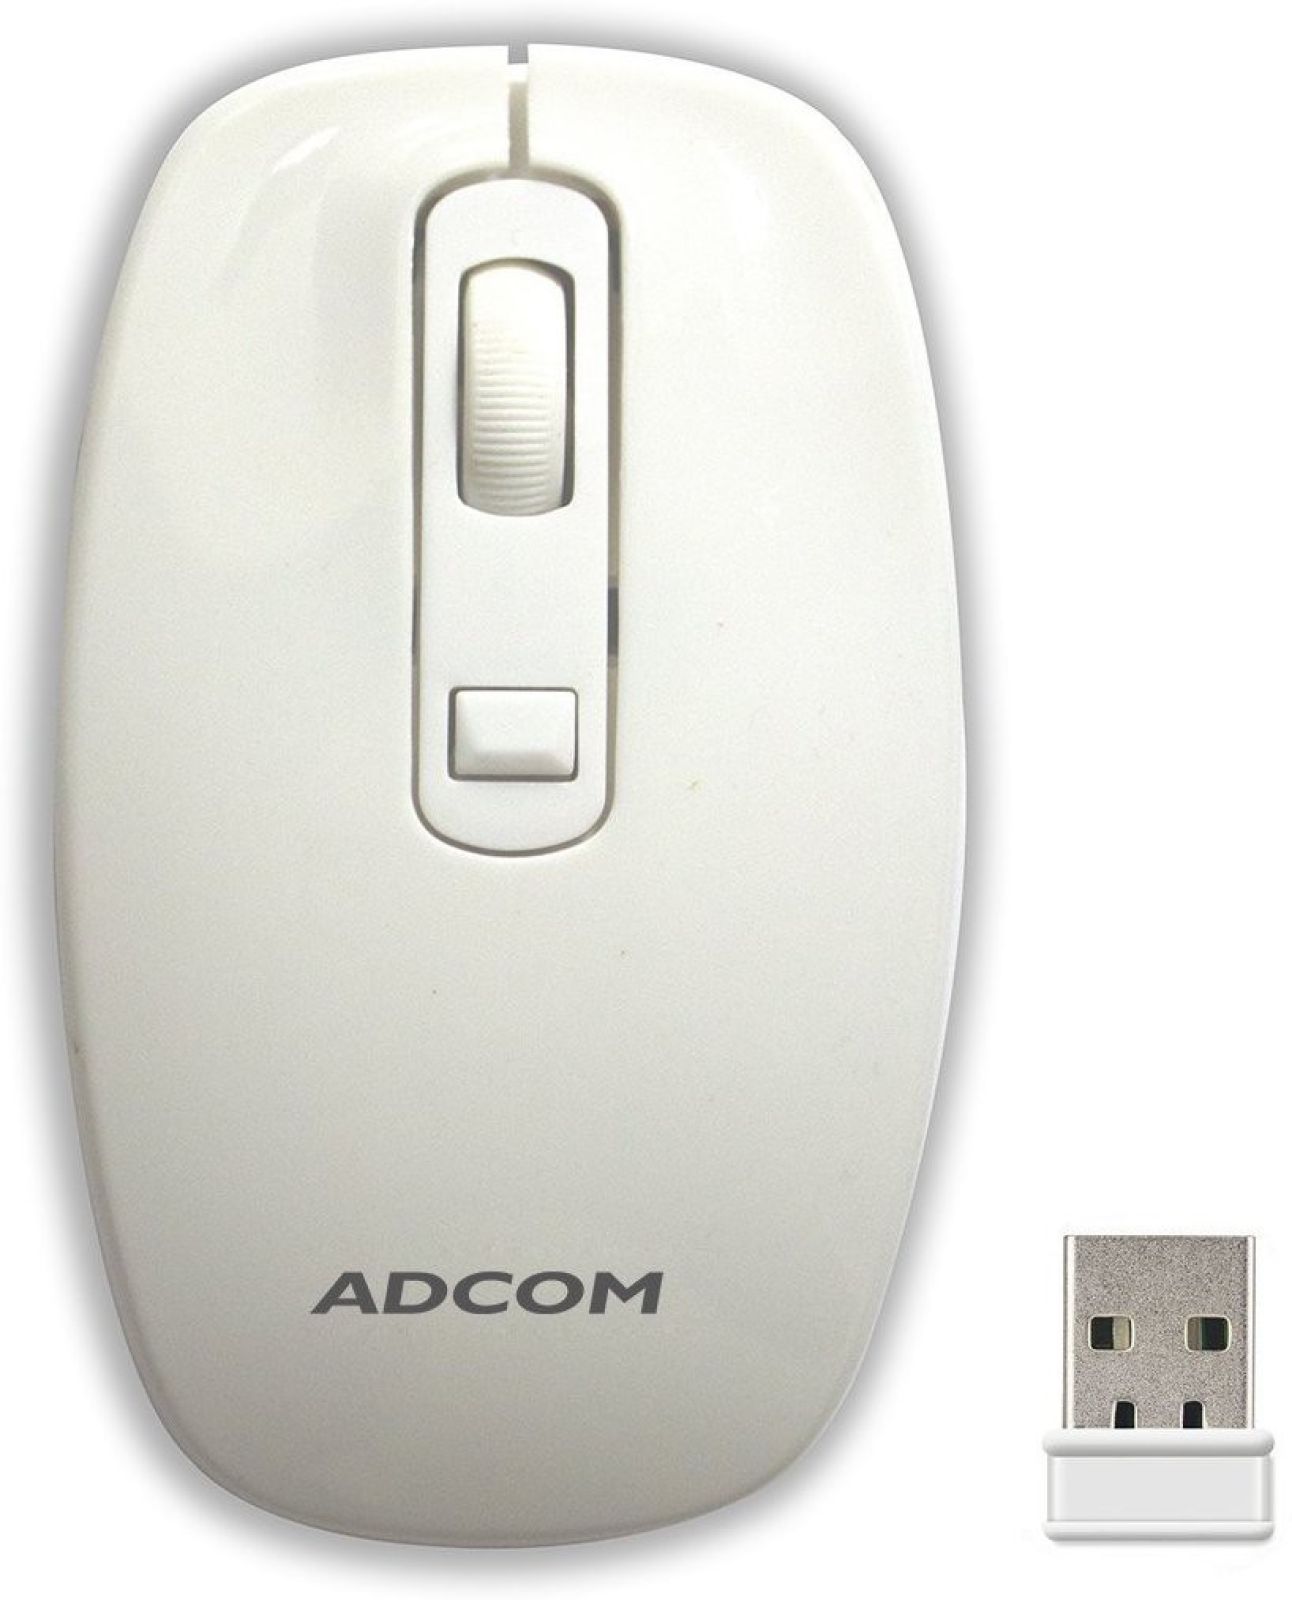 Adcom Wireless M-006 Wireless Optical Mouse (USB, White) at Rs 246 only